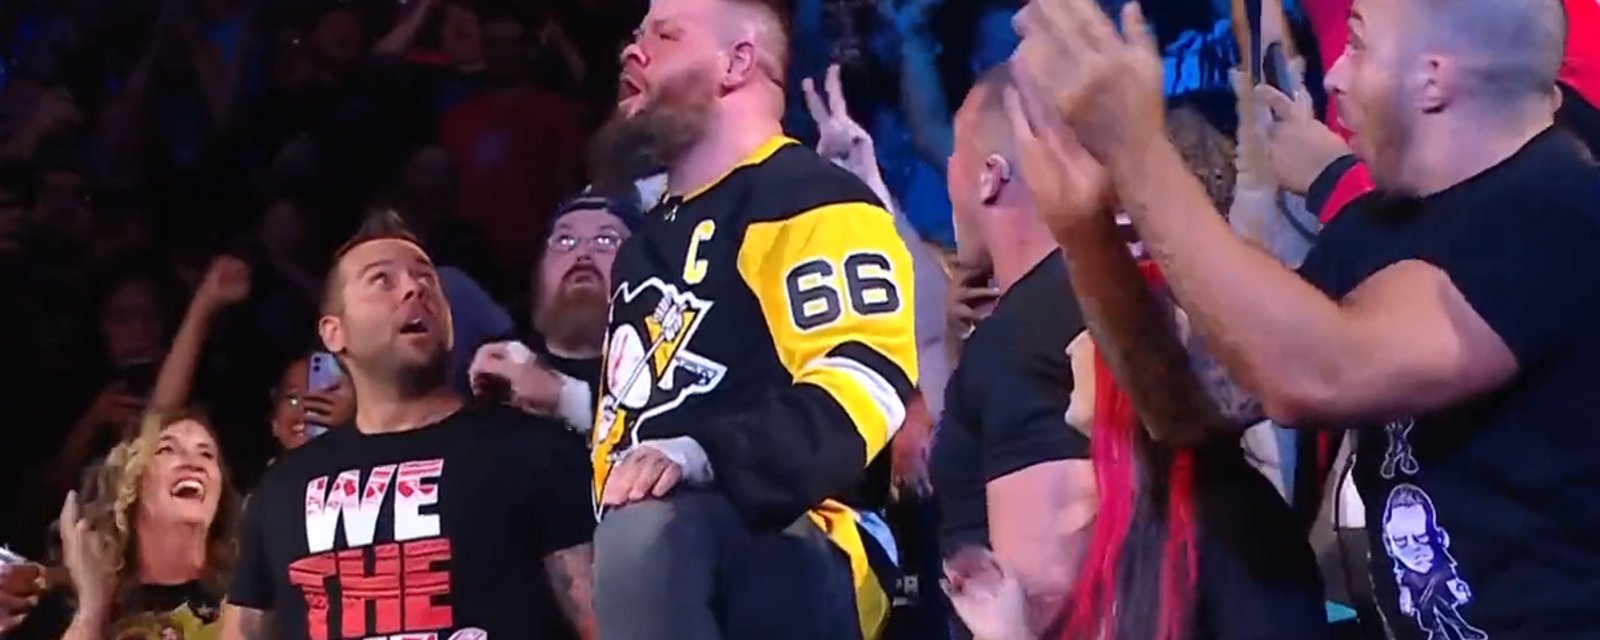 Kevin Owens jumps off railing wearing Mario Lemieux jersey.